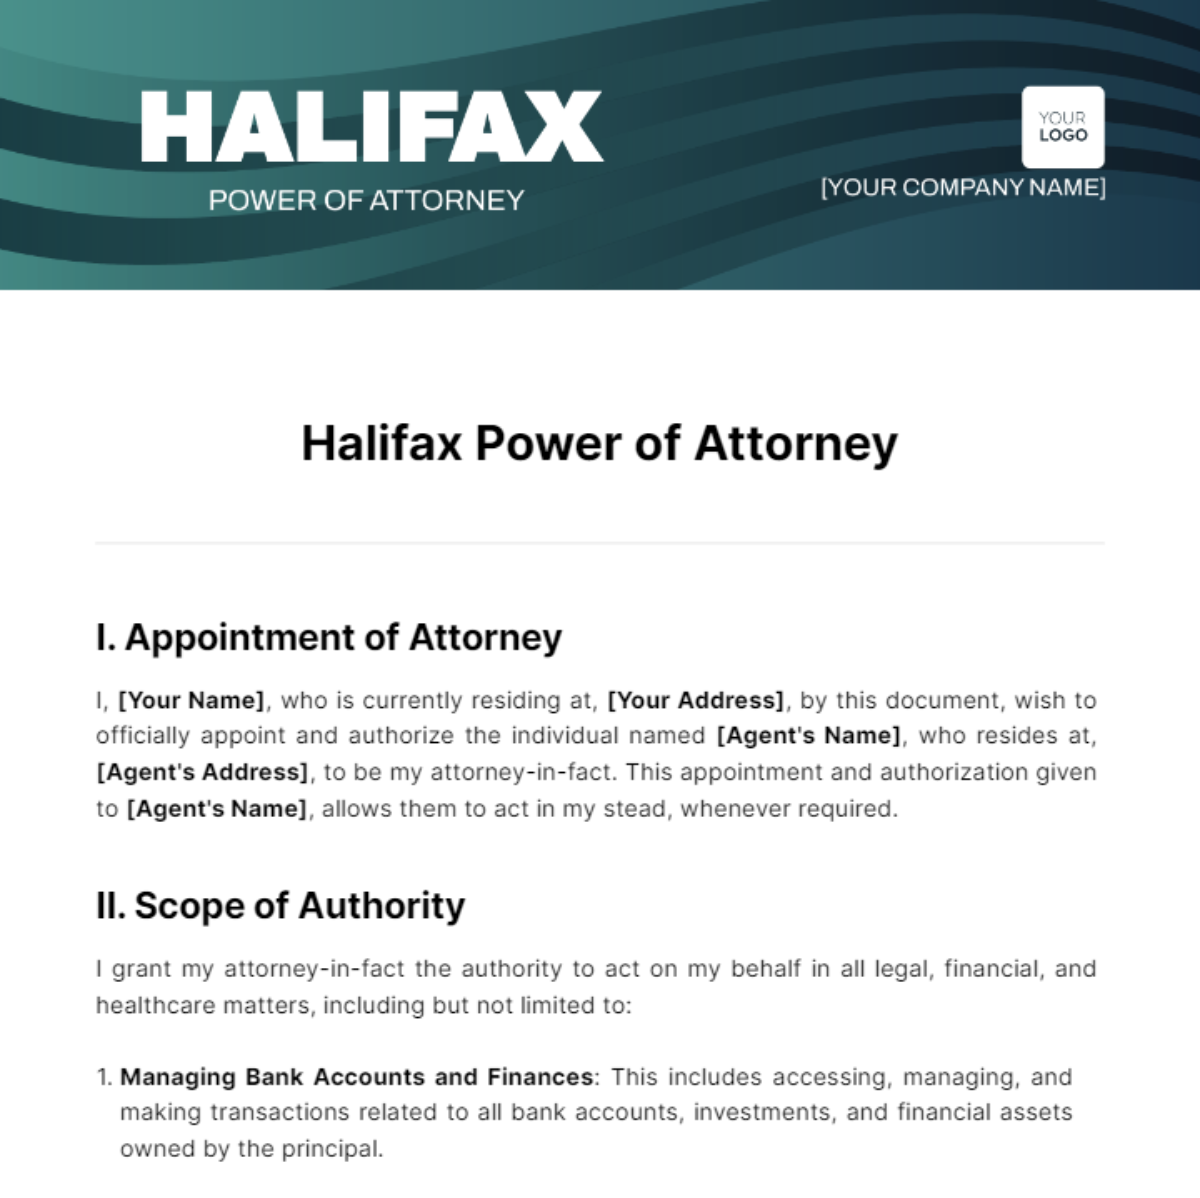 Halifax Power of Attorney Template